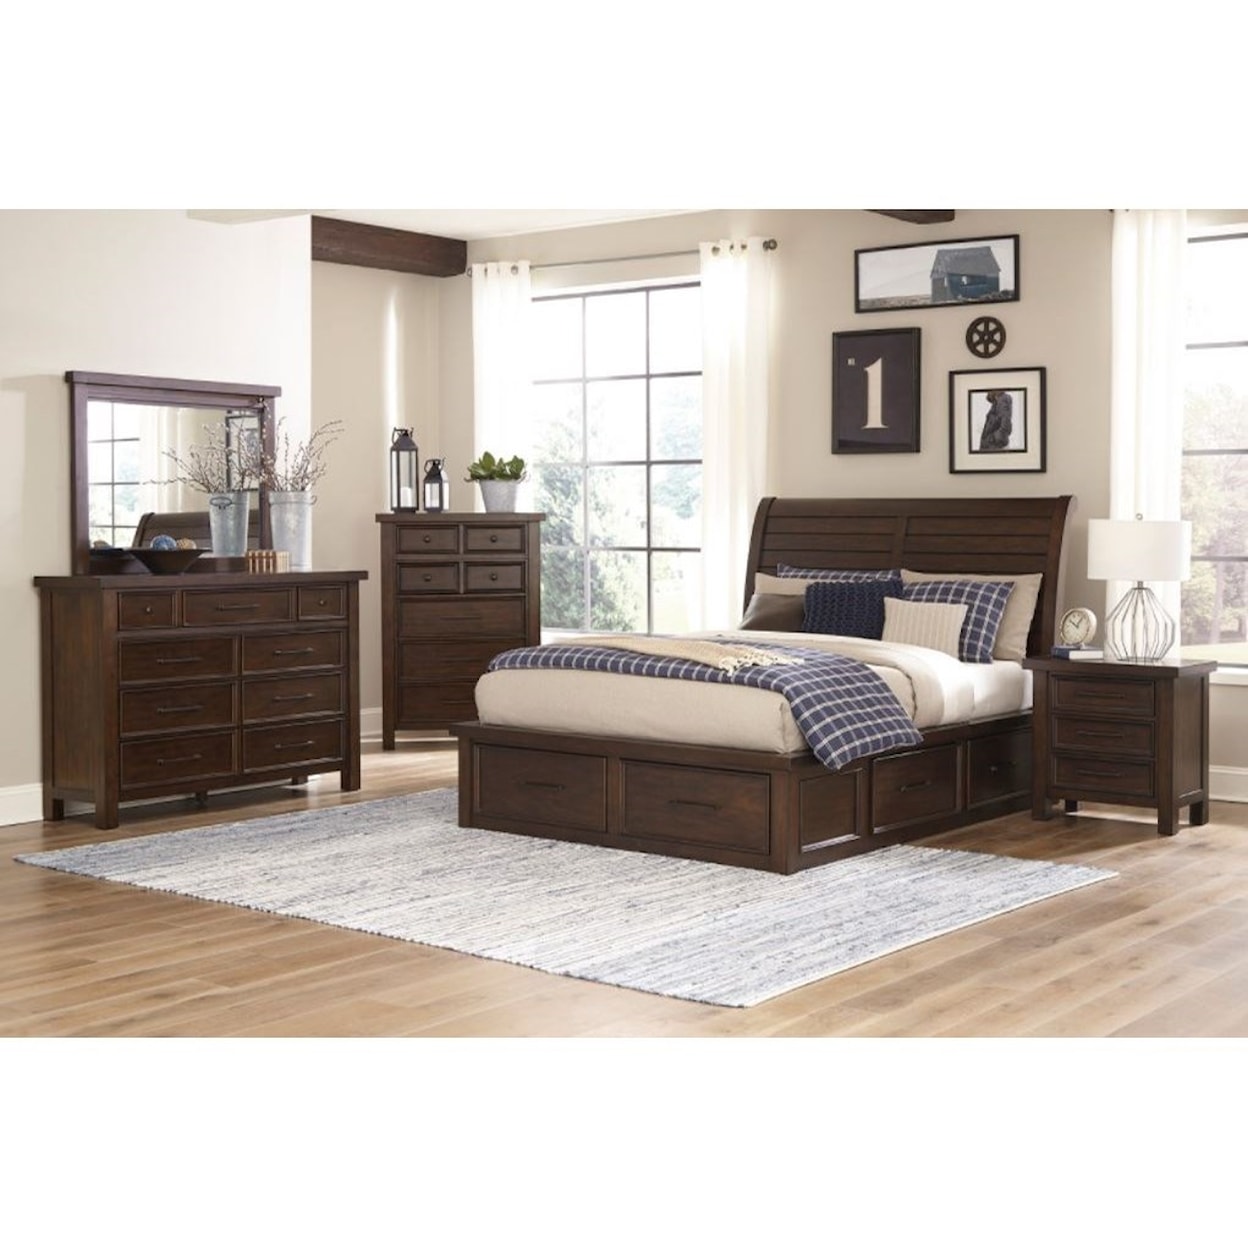 Home Style Logan 5 Piece King Storage Bedroom Group